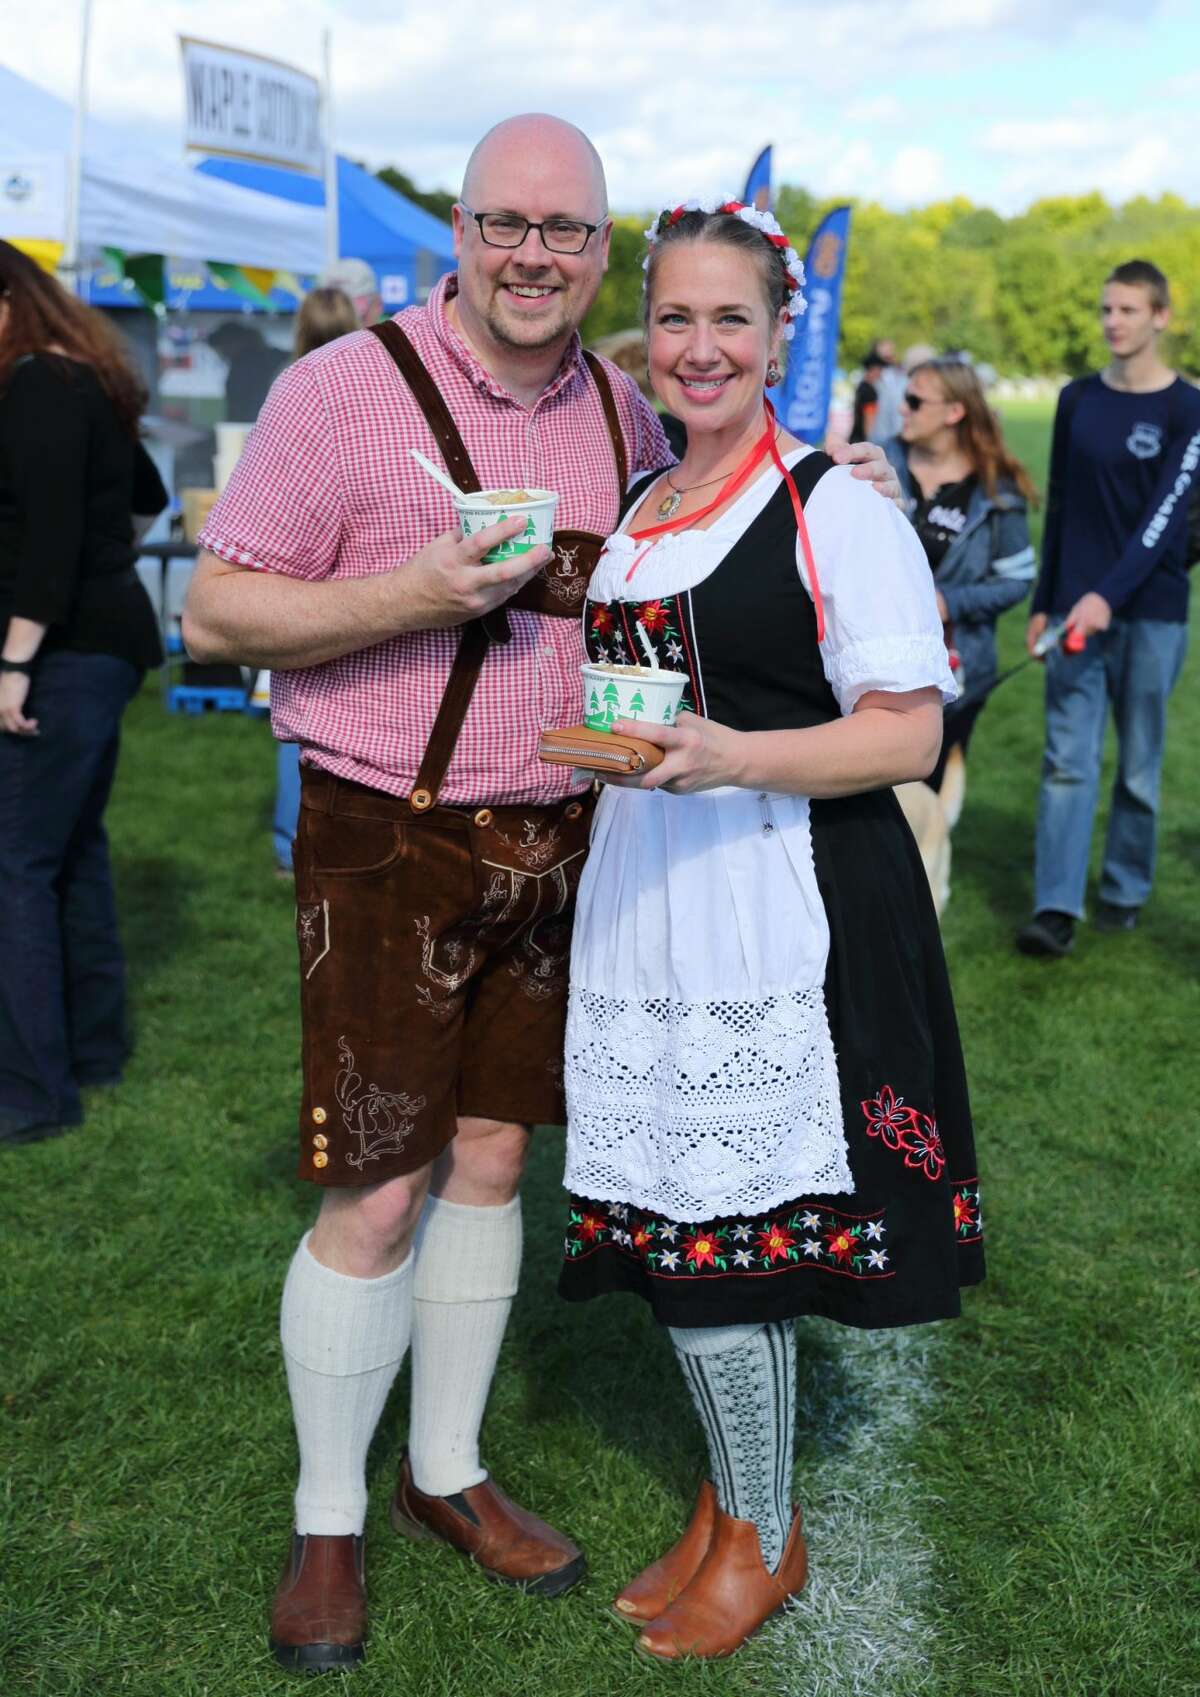 Were you Seen at the 9th Annual Glenville Oktoberfest held at Maalwyck Park in Glenville on Saturday, September 29, 2018?